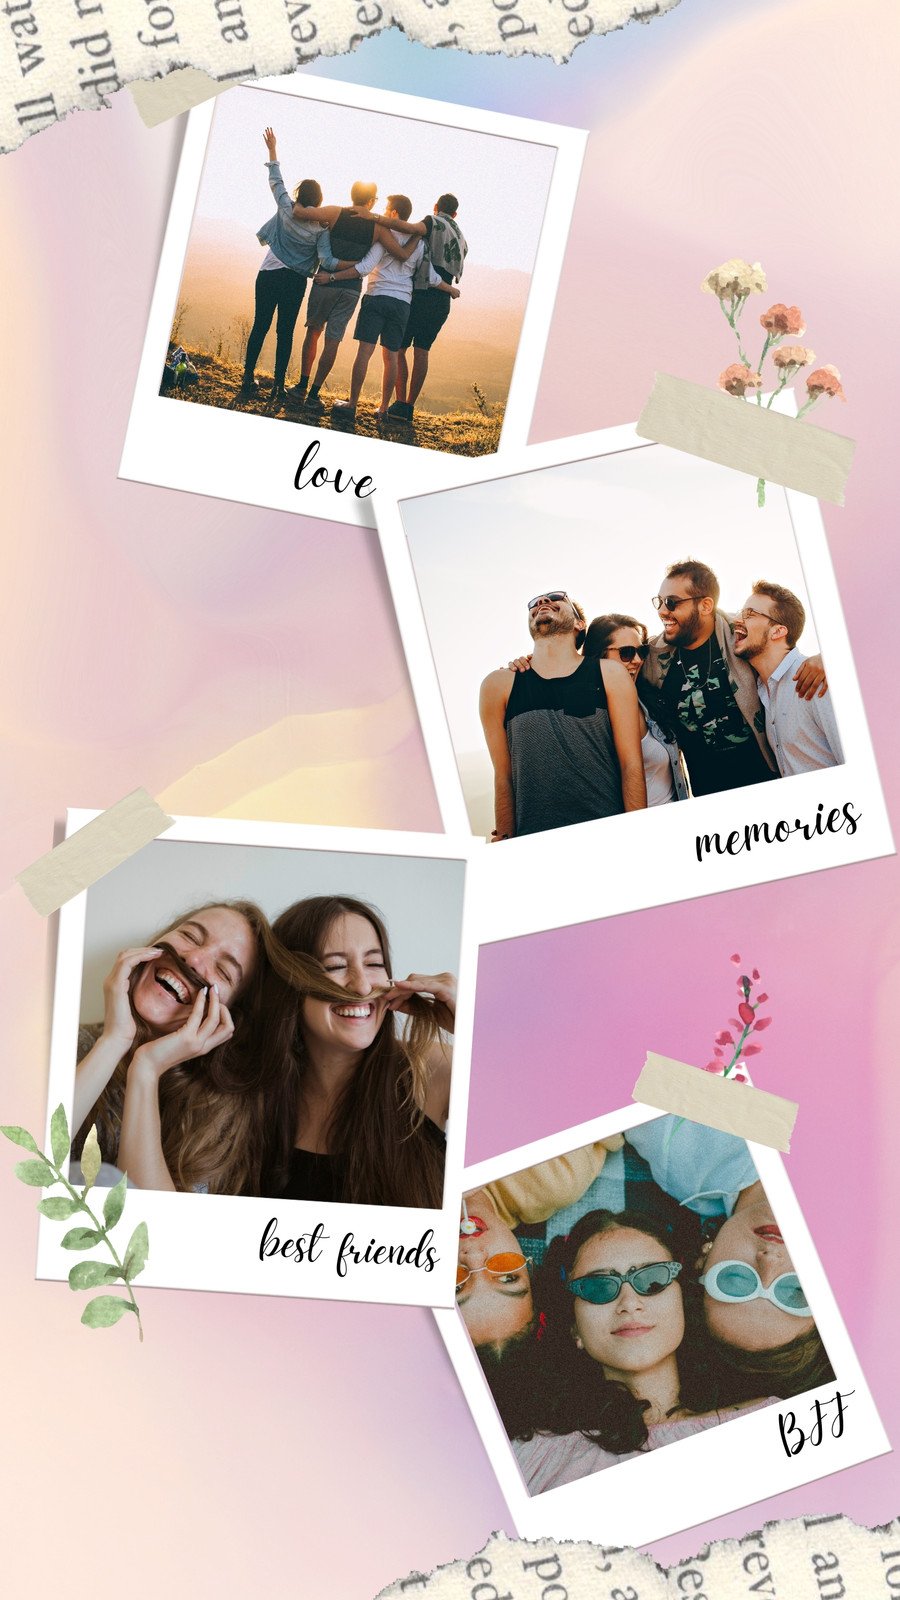 Add a Photo Frame Effect To Your Pictures - Canva